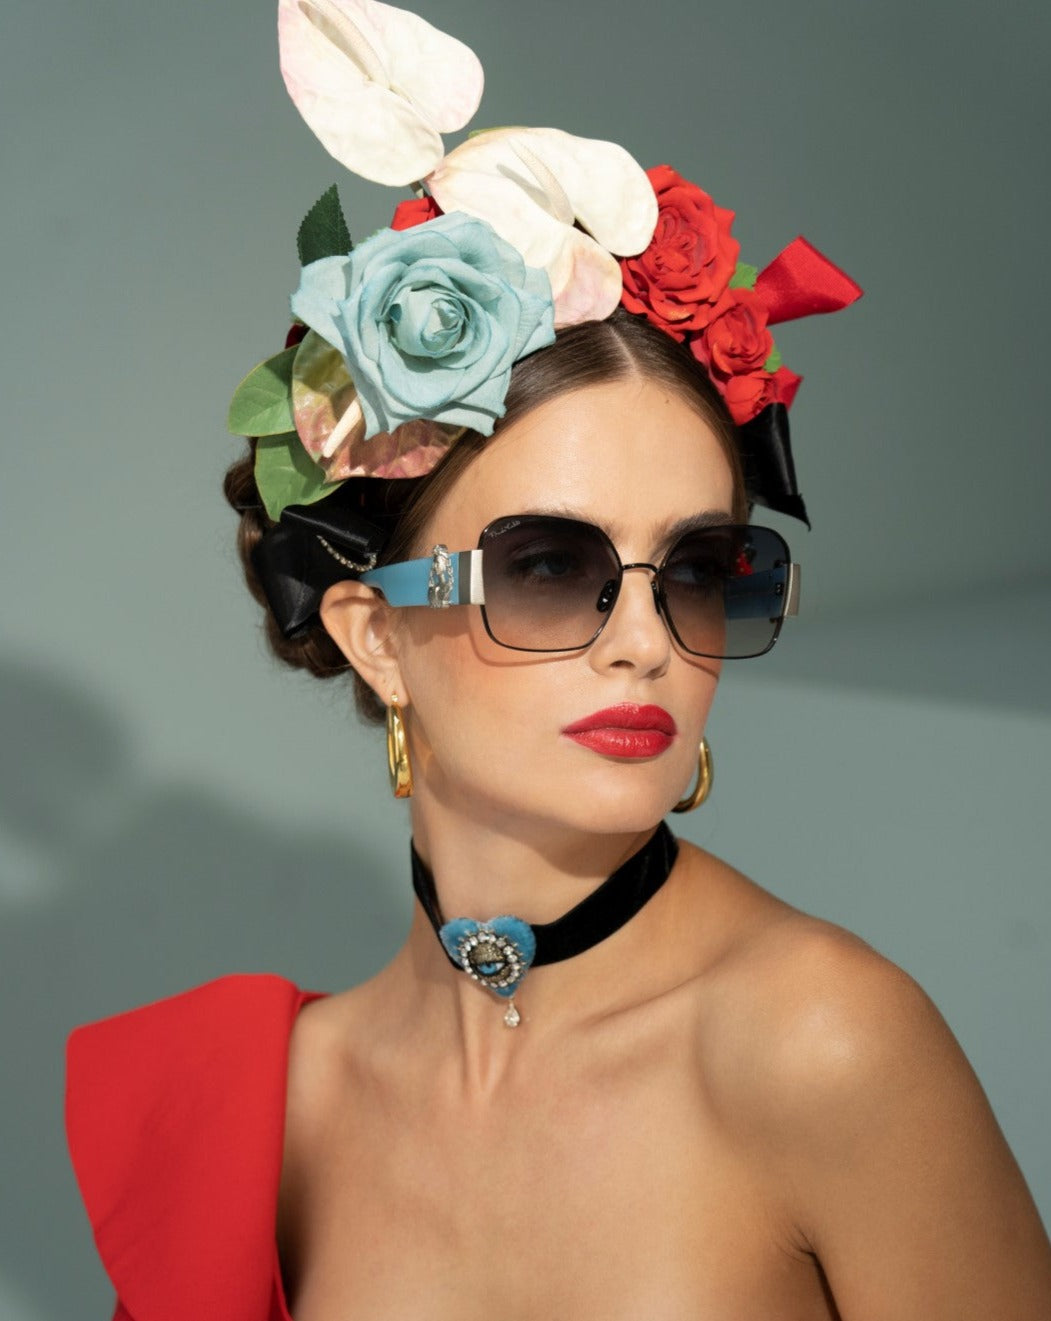 A woman wearing oversized For Art&#39;s Sake® Frida Mask with ultra-lightweight Nylon lenses, a black choker with a blue brooch, and a red off-the-shoulder outfit. She has red lipstick and a floral headpiece adorned with blue, white, and red flowers. The background is plain and grey.